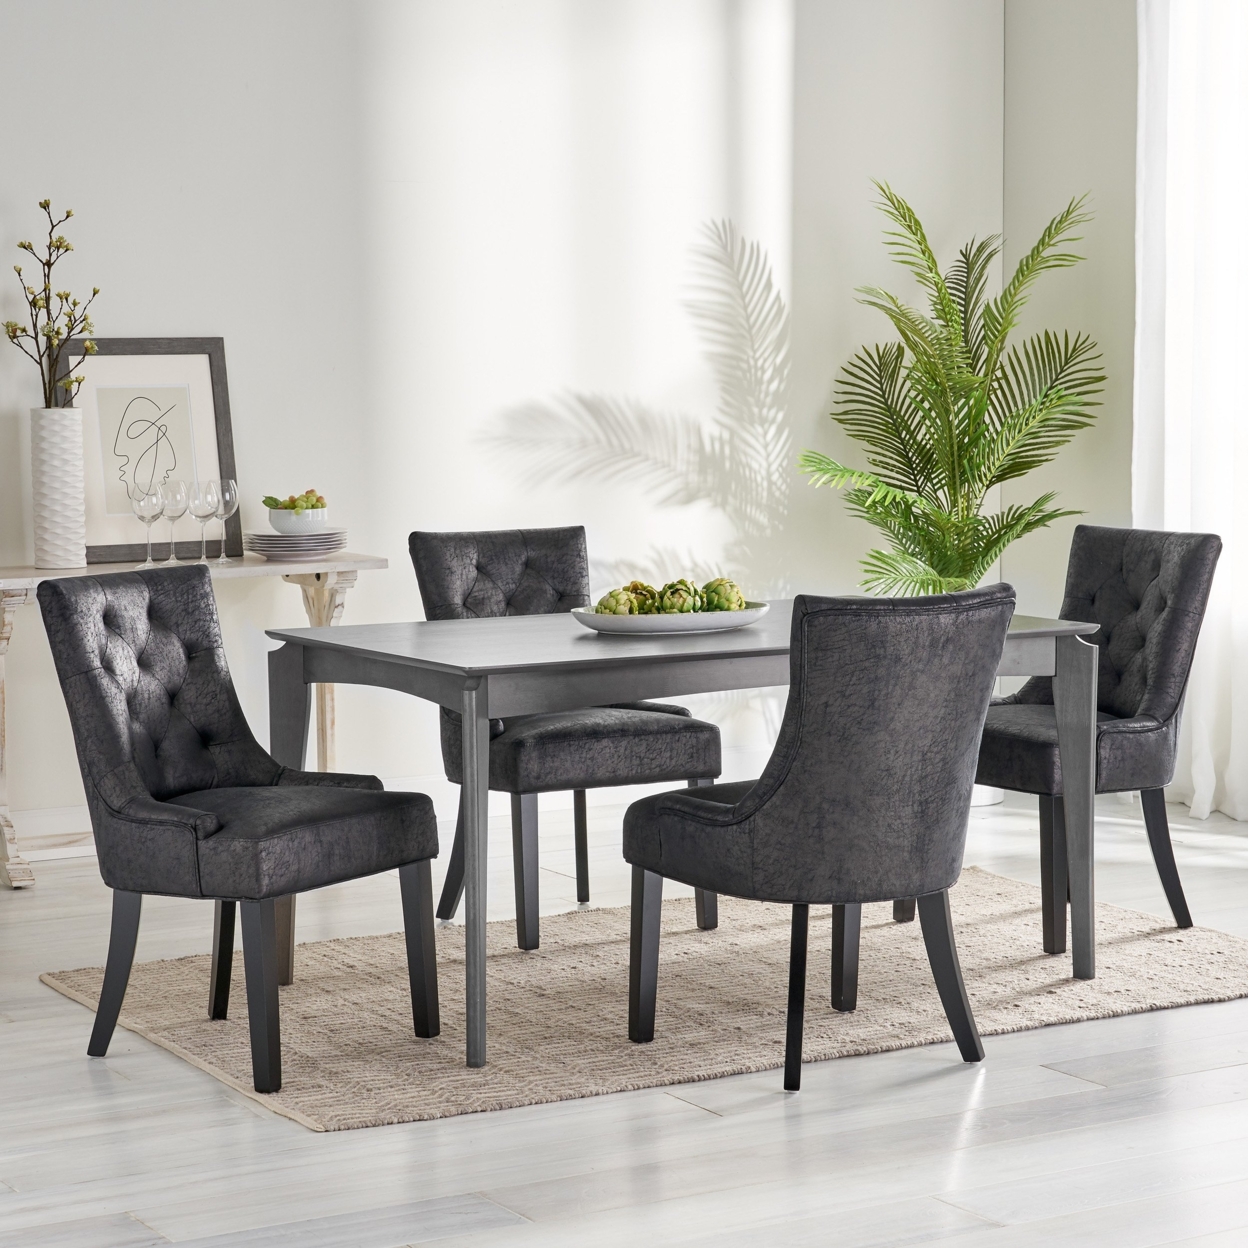 Stacy Hourglass Microfiber Dining Chairs (Set Of 4) - Black